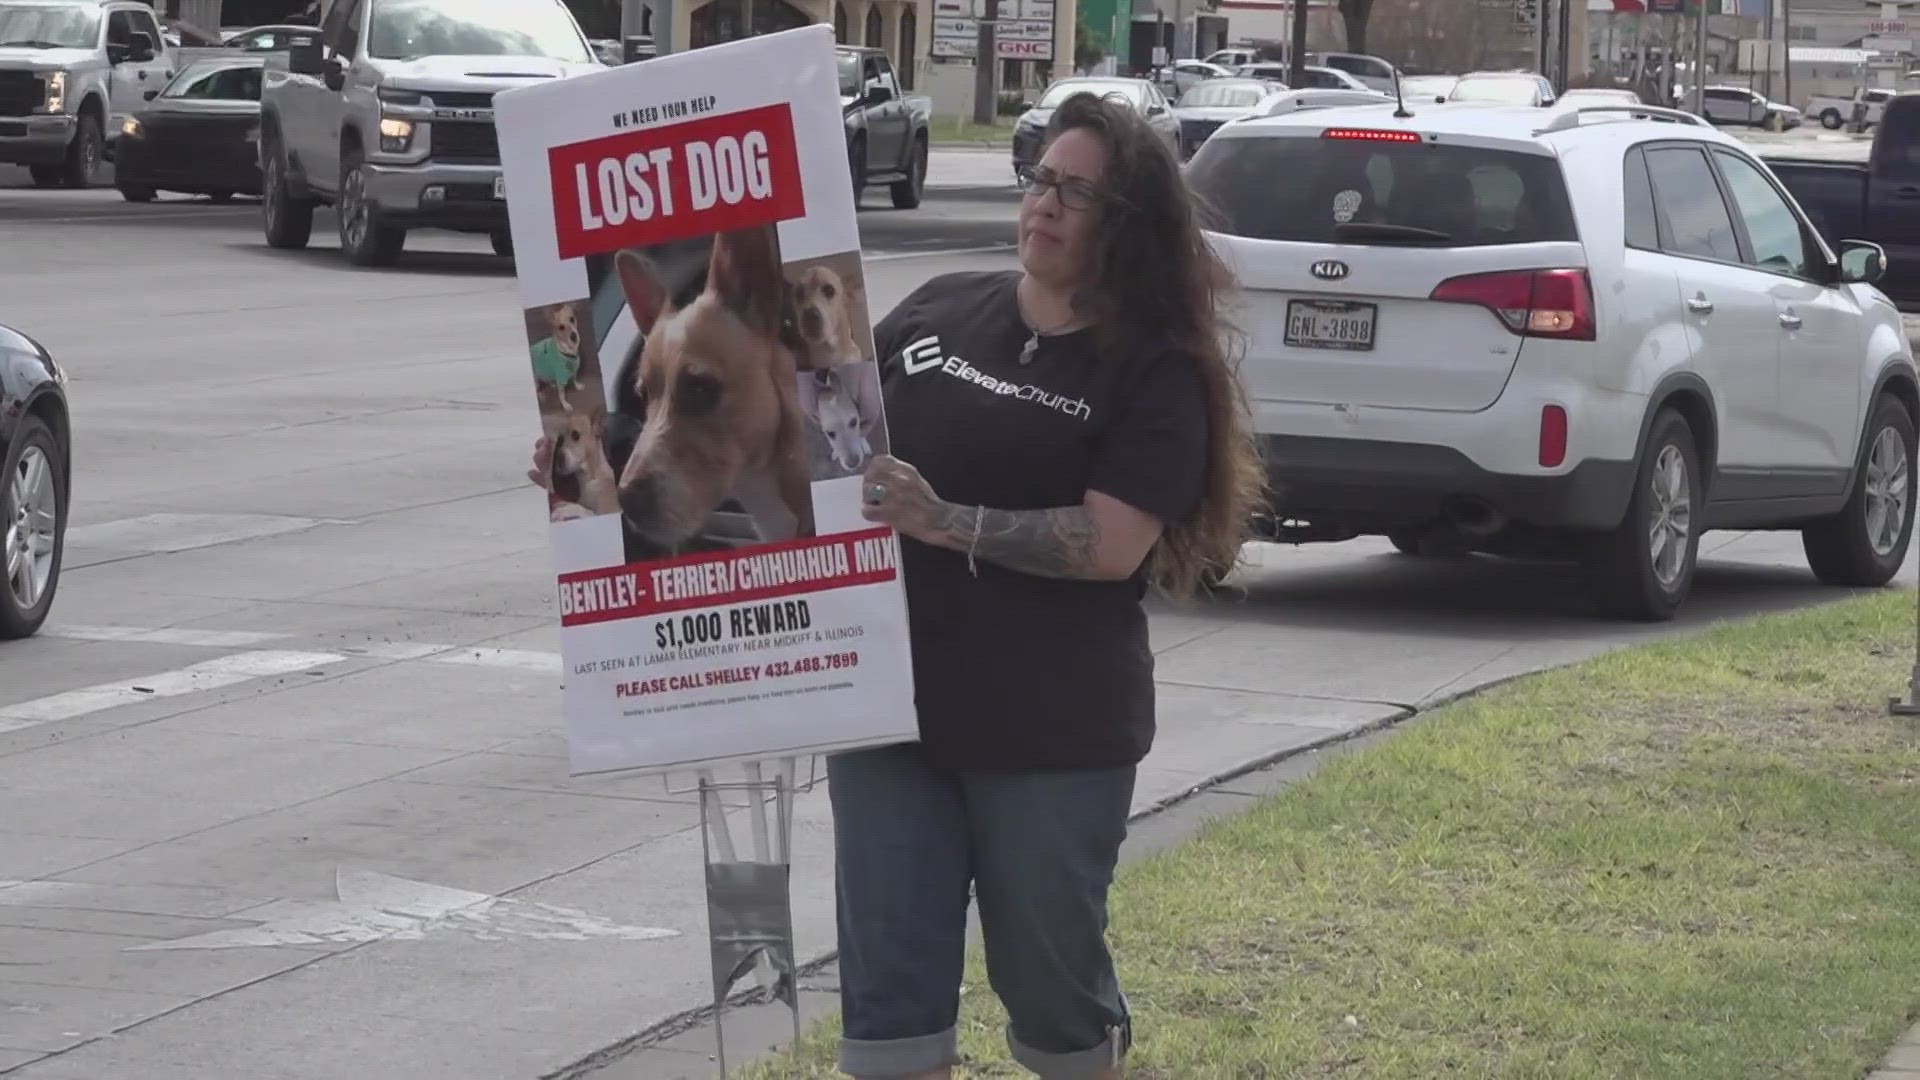 Sandra Ramos has been standing at intersections holding a lost dog sign looking for a dog that's not hers and that she doesn't even know.